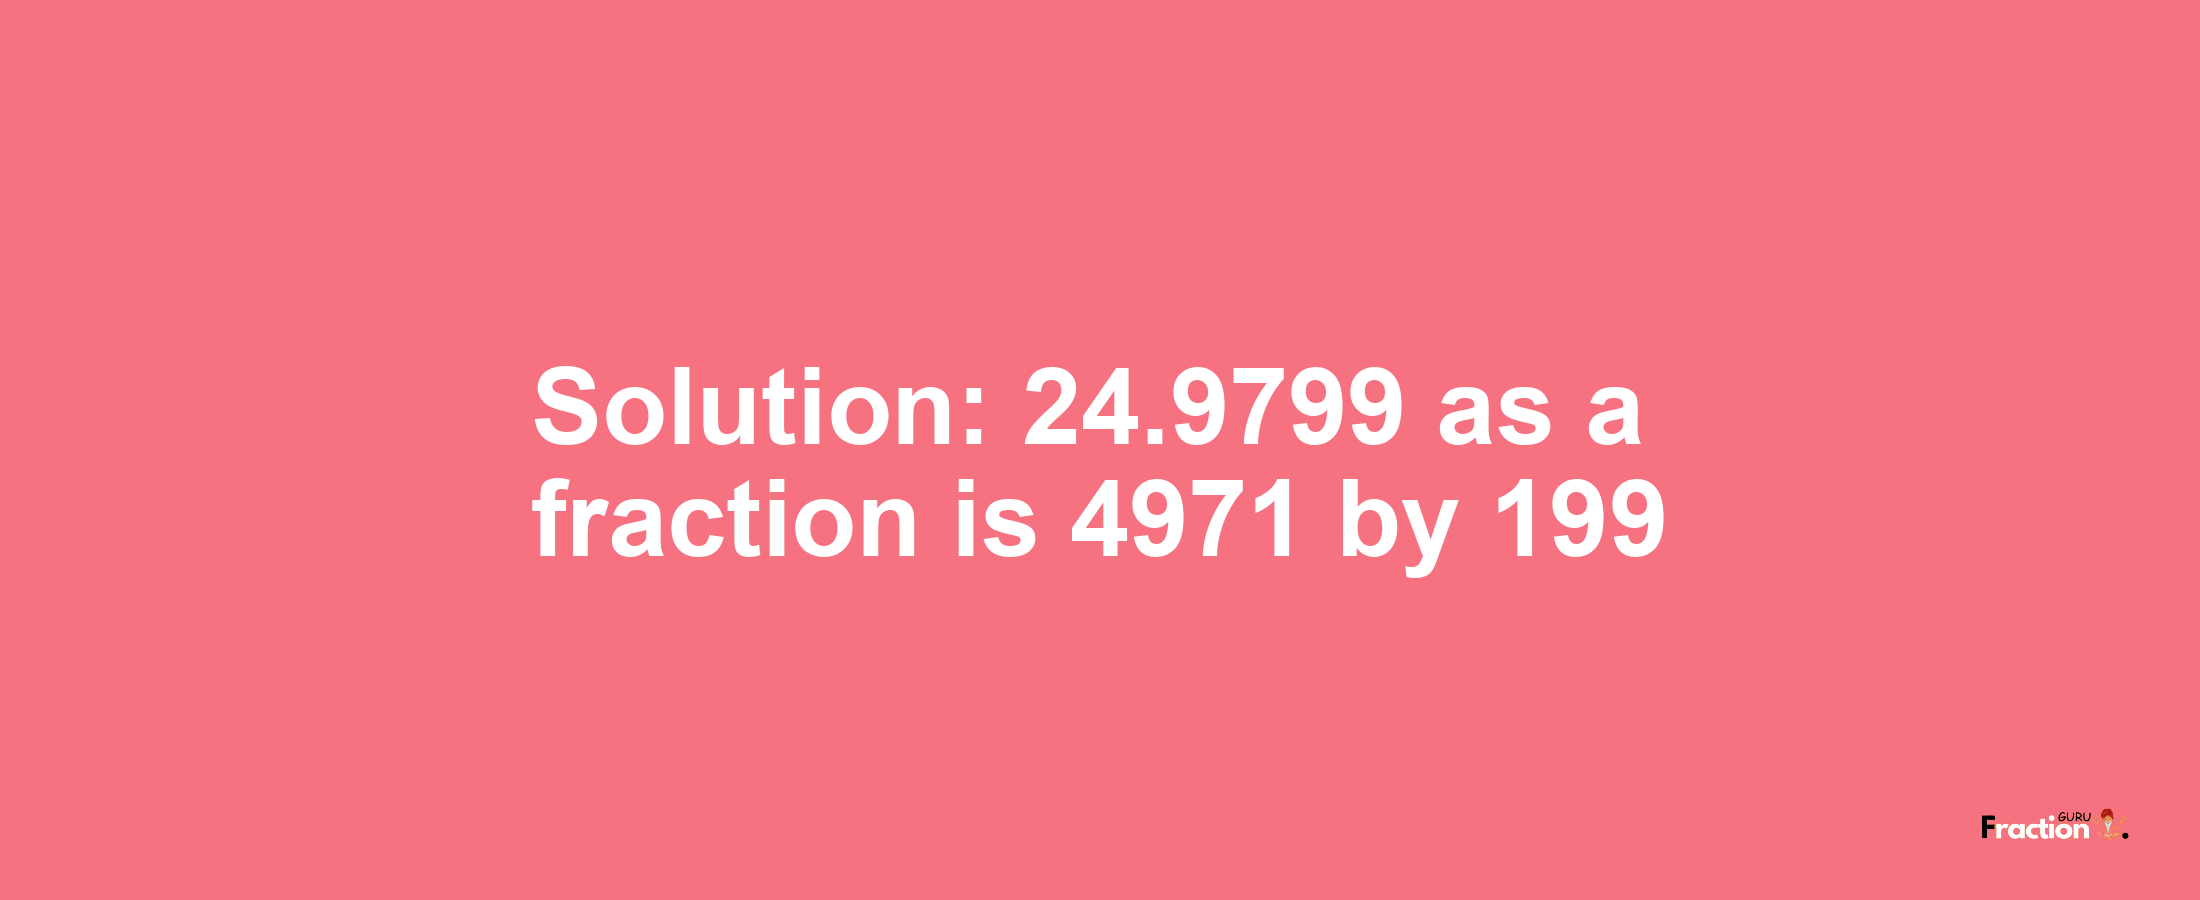 Solution:24.9799 as a fraction is 4971/199